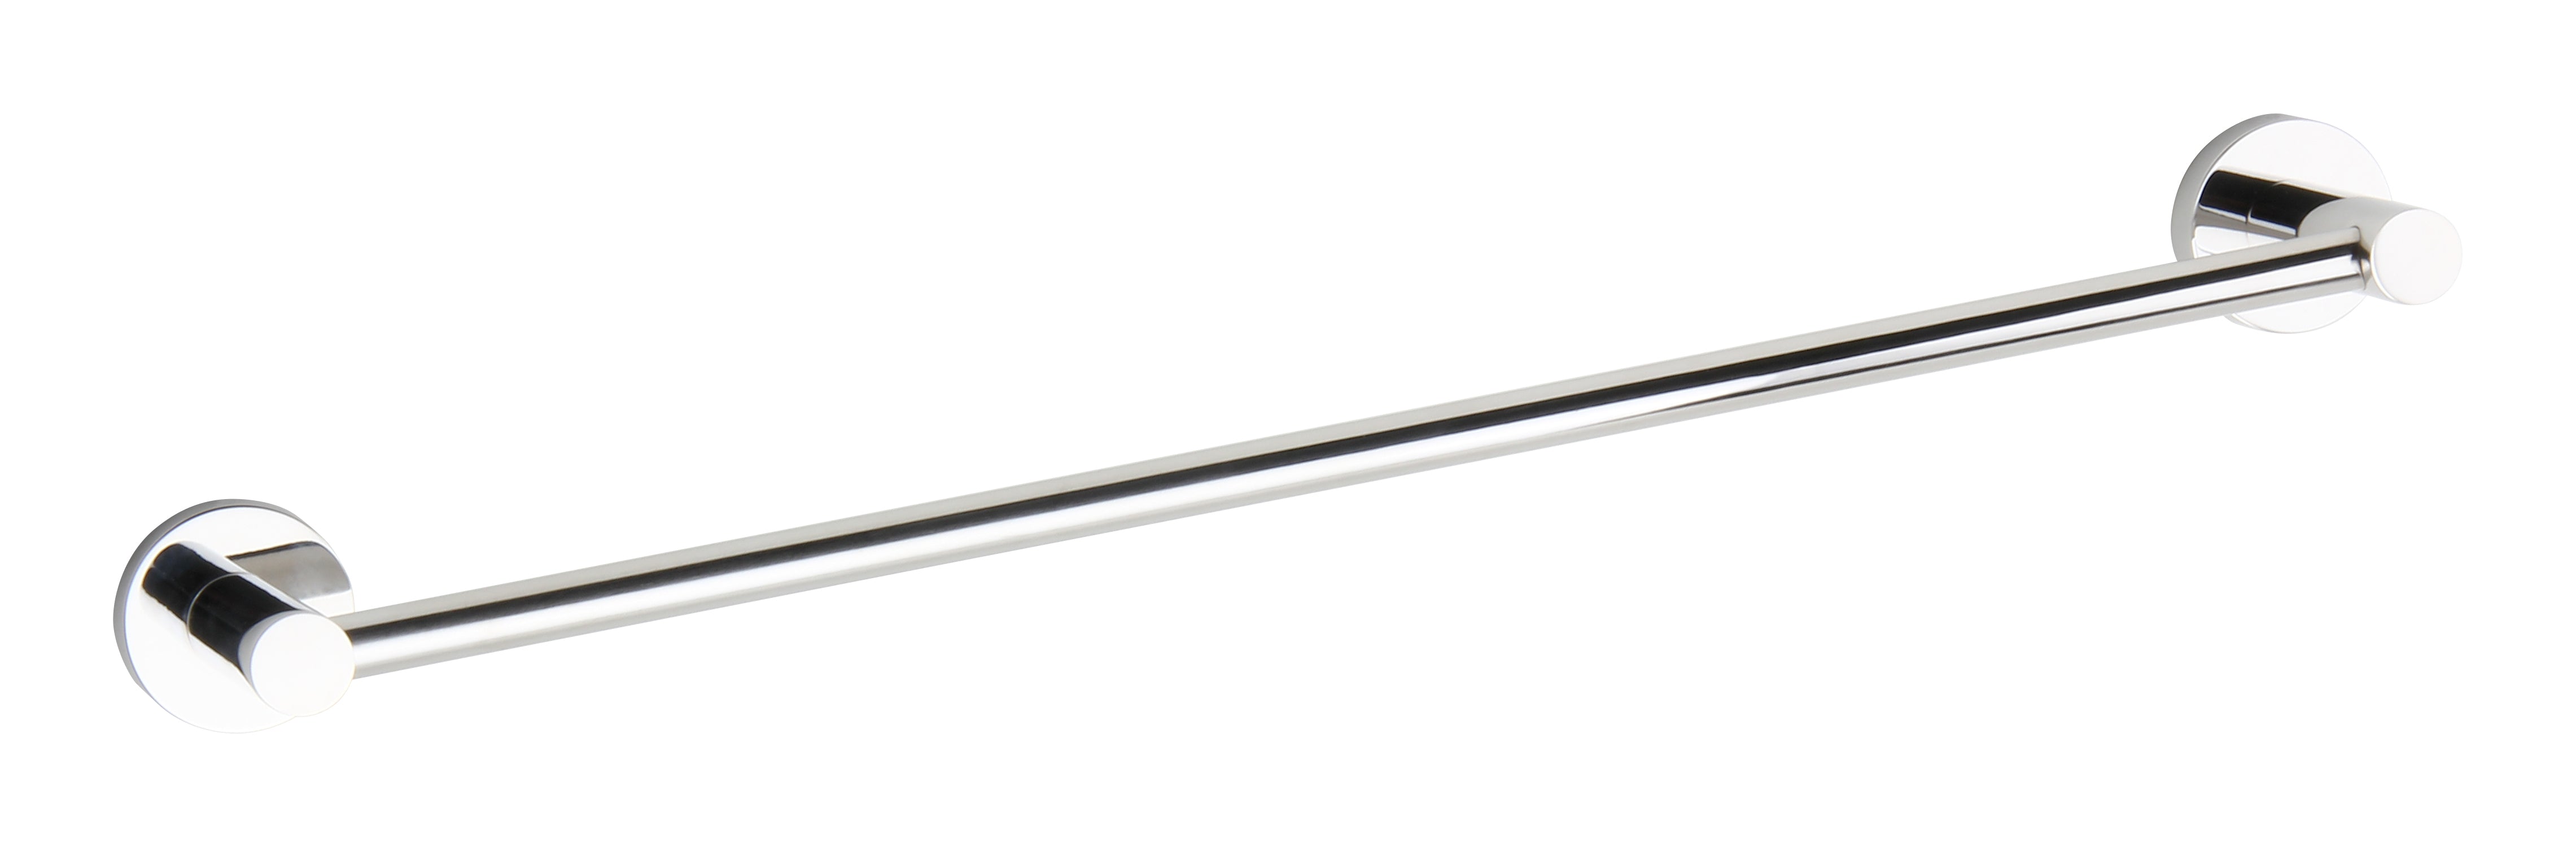 SS304 Towel Bar in Polished Chrome Finish